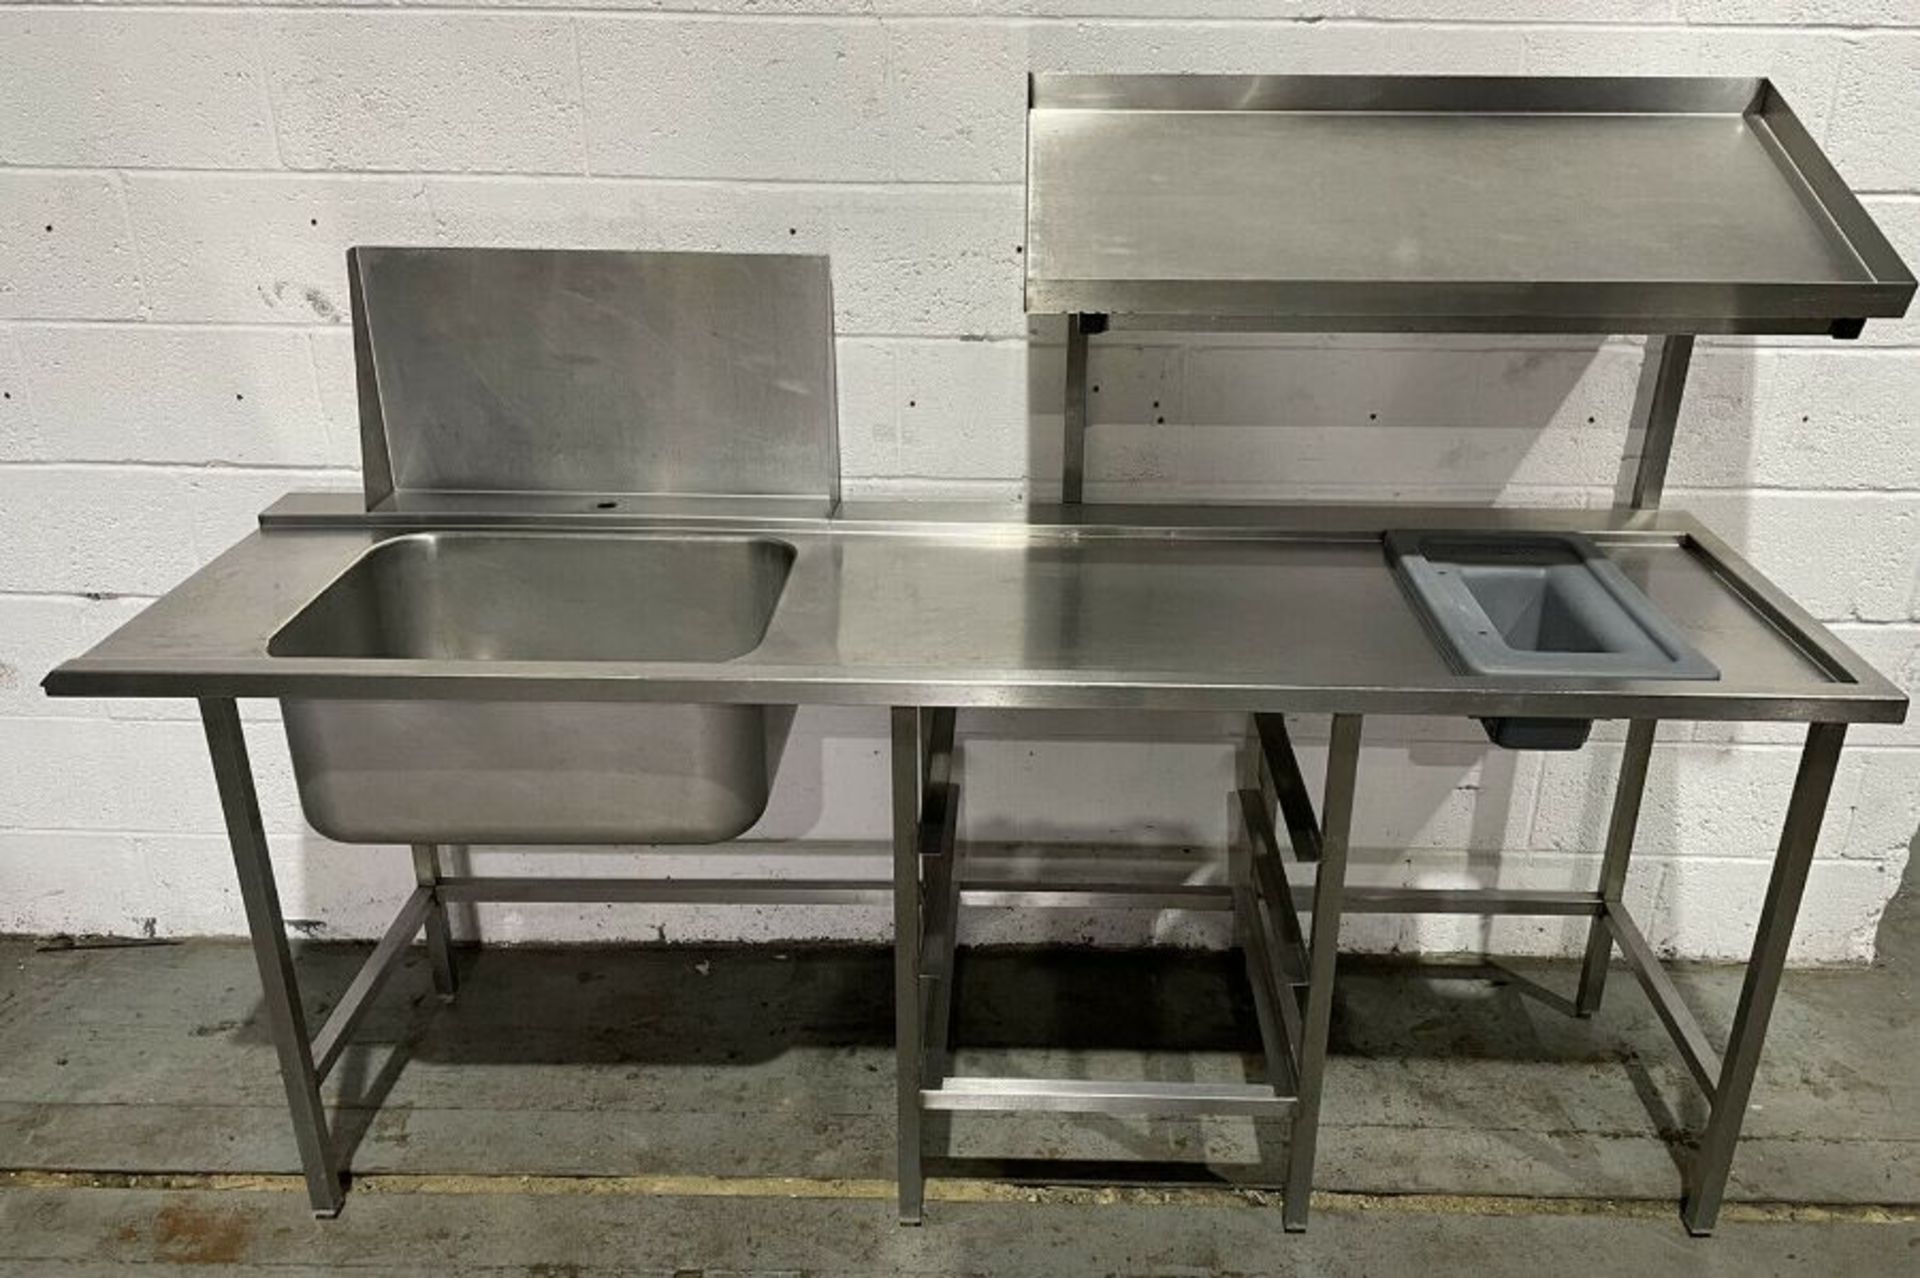 Righthand Dishwasher Entry Sink With Tray Racks 22